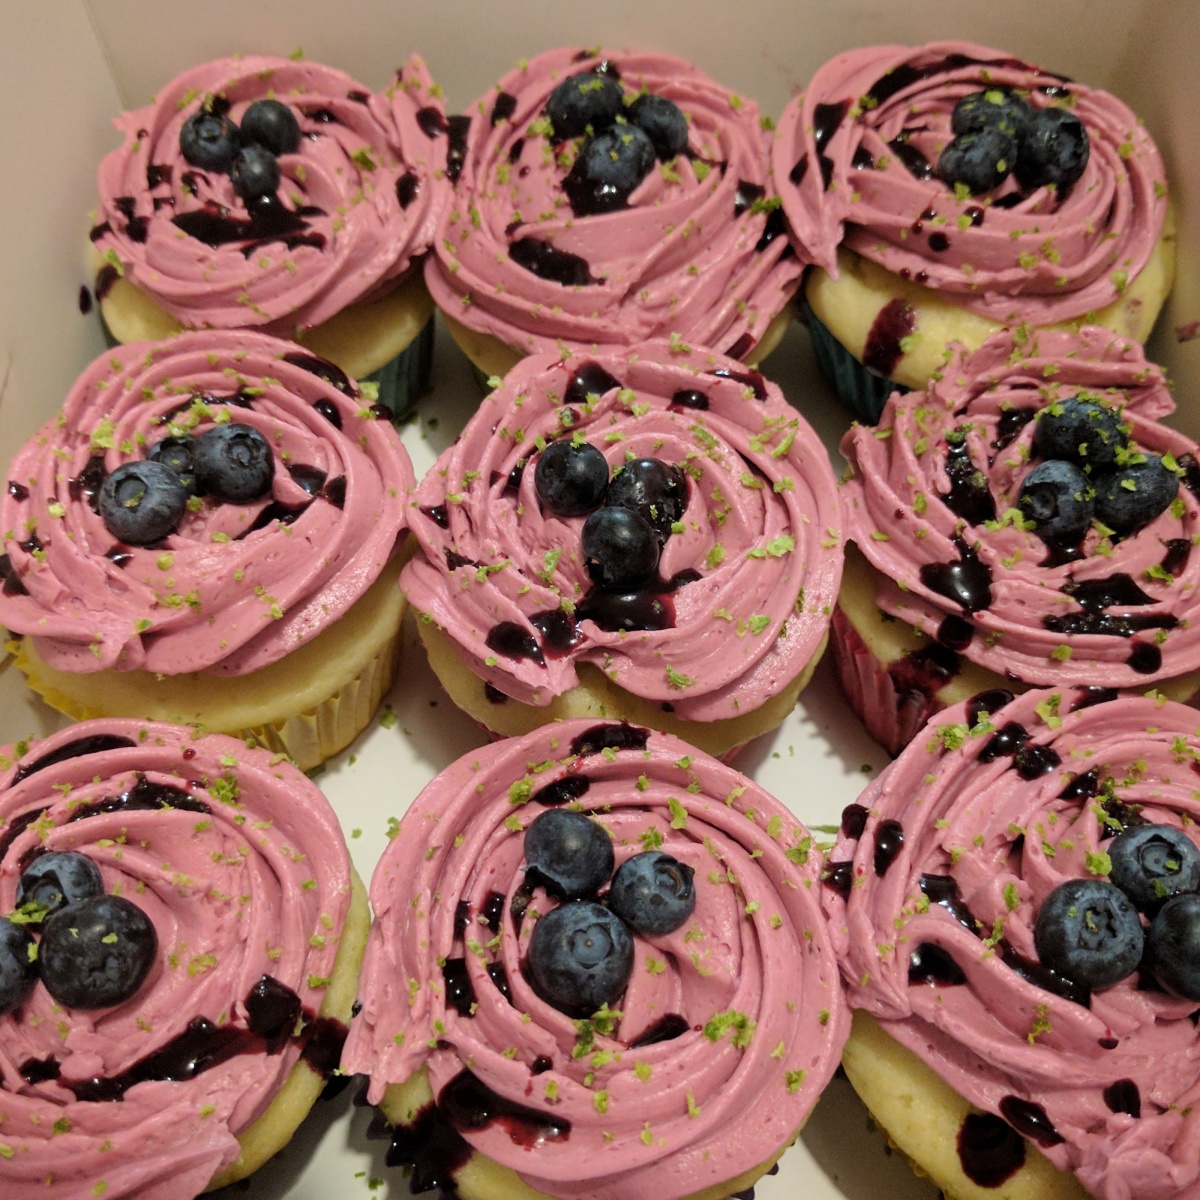 Can't stop eating these- Lemon cupcakes with blueberry buttercream frosting.